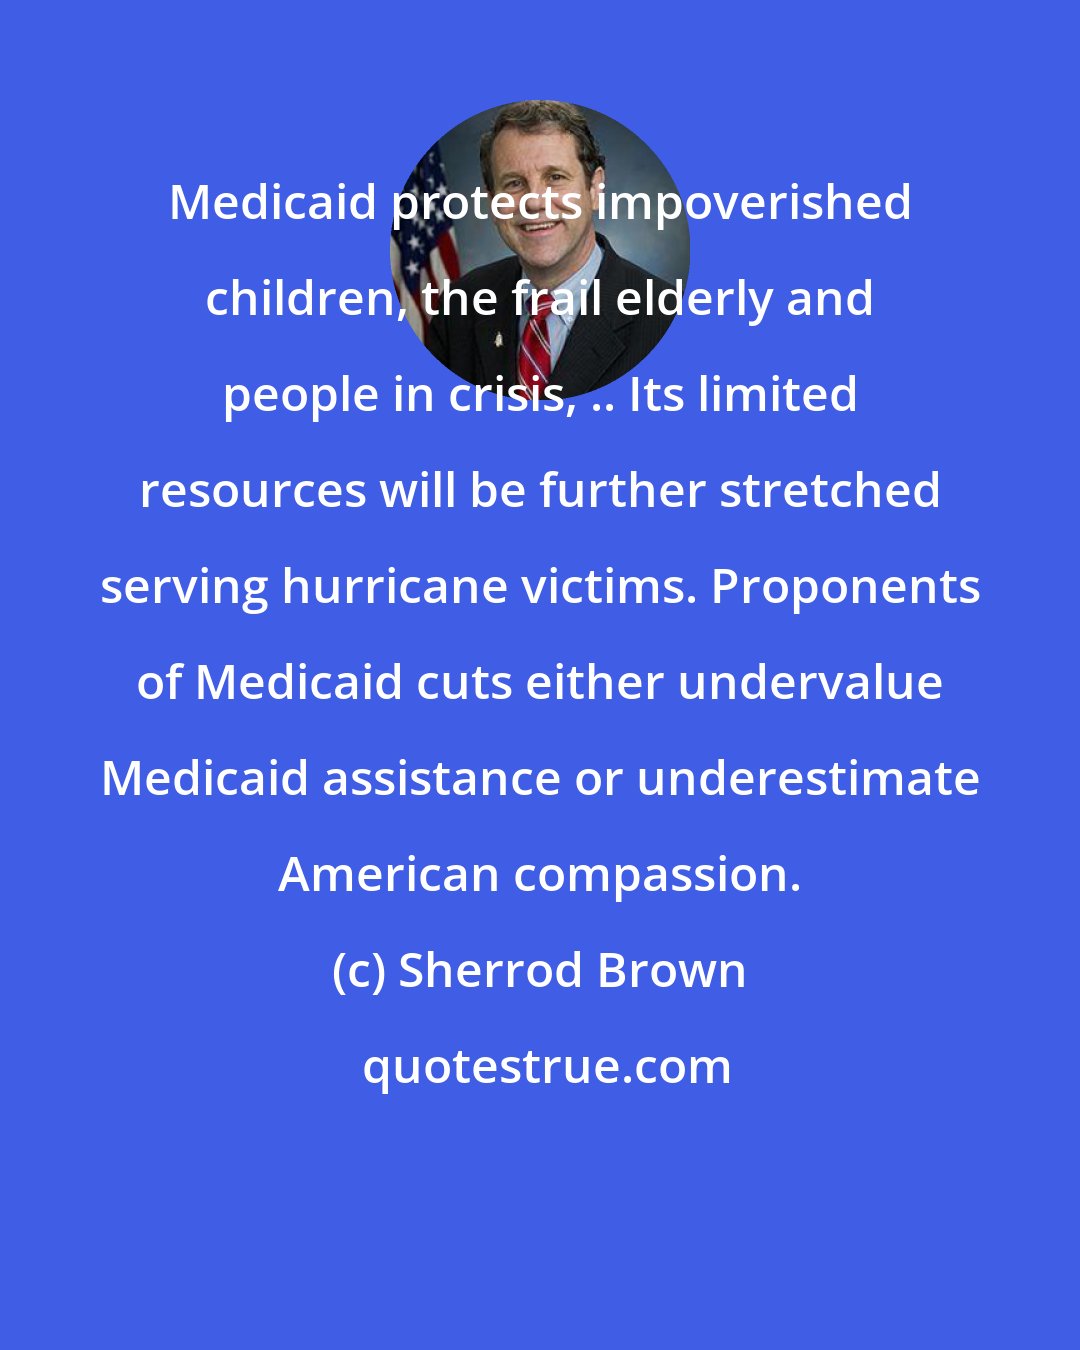 Sherrod Brown: Medicaid protects impoverished children, the frail elderly and people in crisis, .. Its limited resources will be further stretched serving hurricane victims. Proponents of Medicaid cuts either undervalue Medicaid assistance or underestimate American compassion.